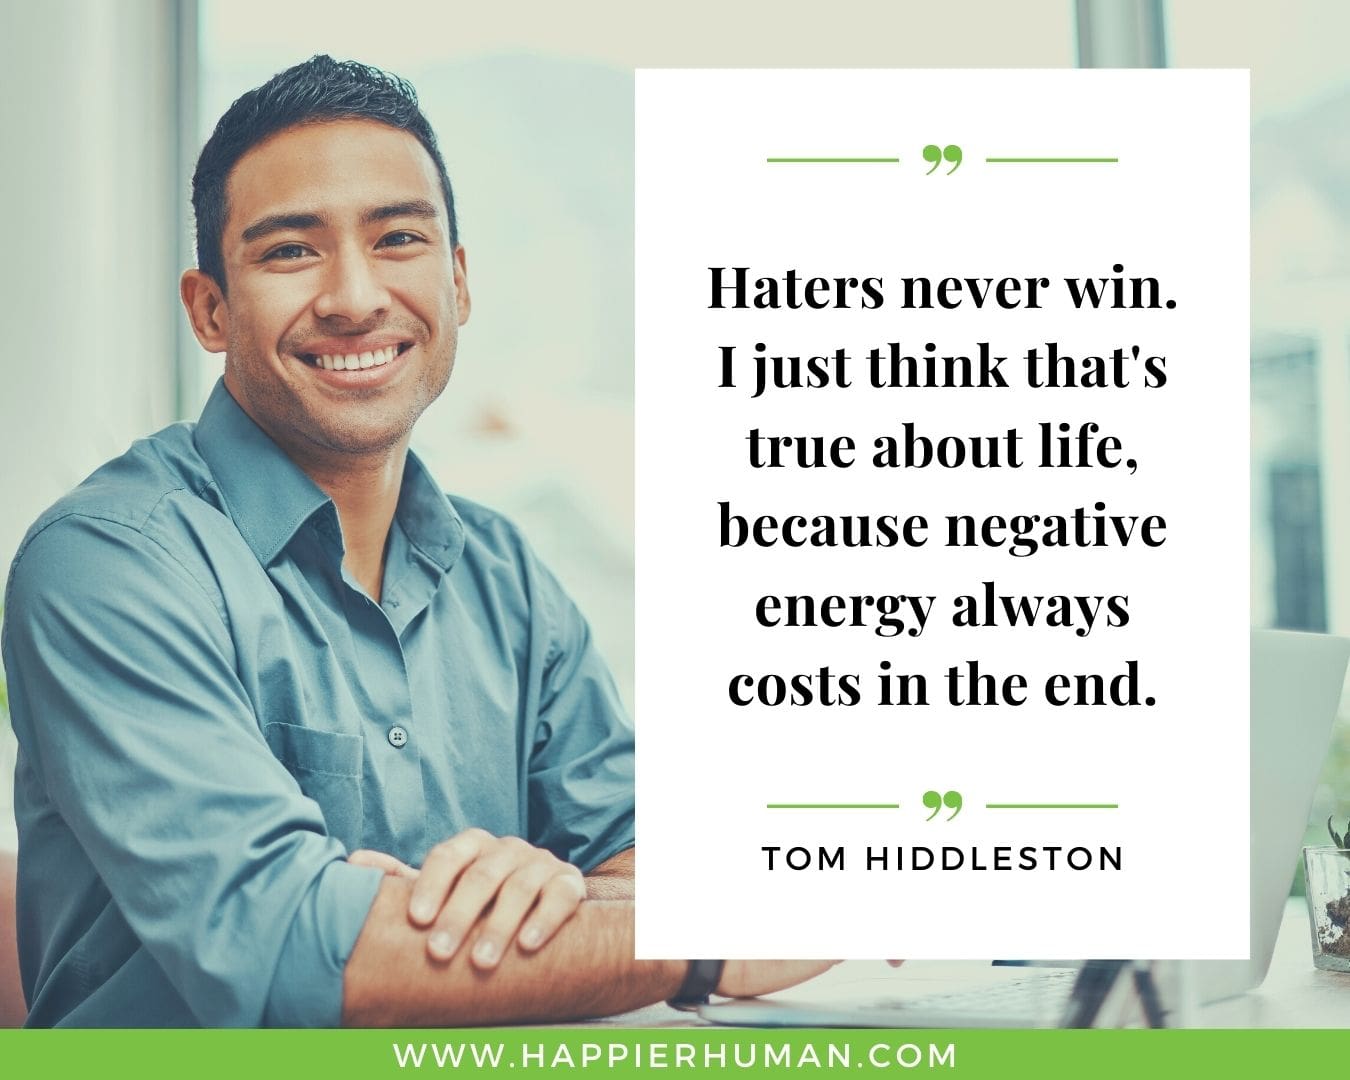 Haters Quotes - “Haters never win. I just think that's true about life, because negative energy always costs in the end.” - Tom Hiddleston